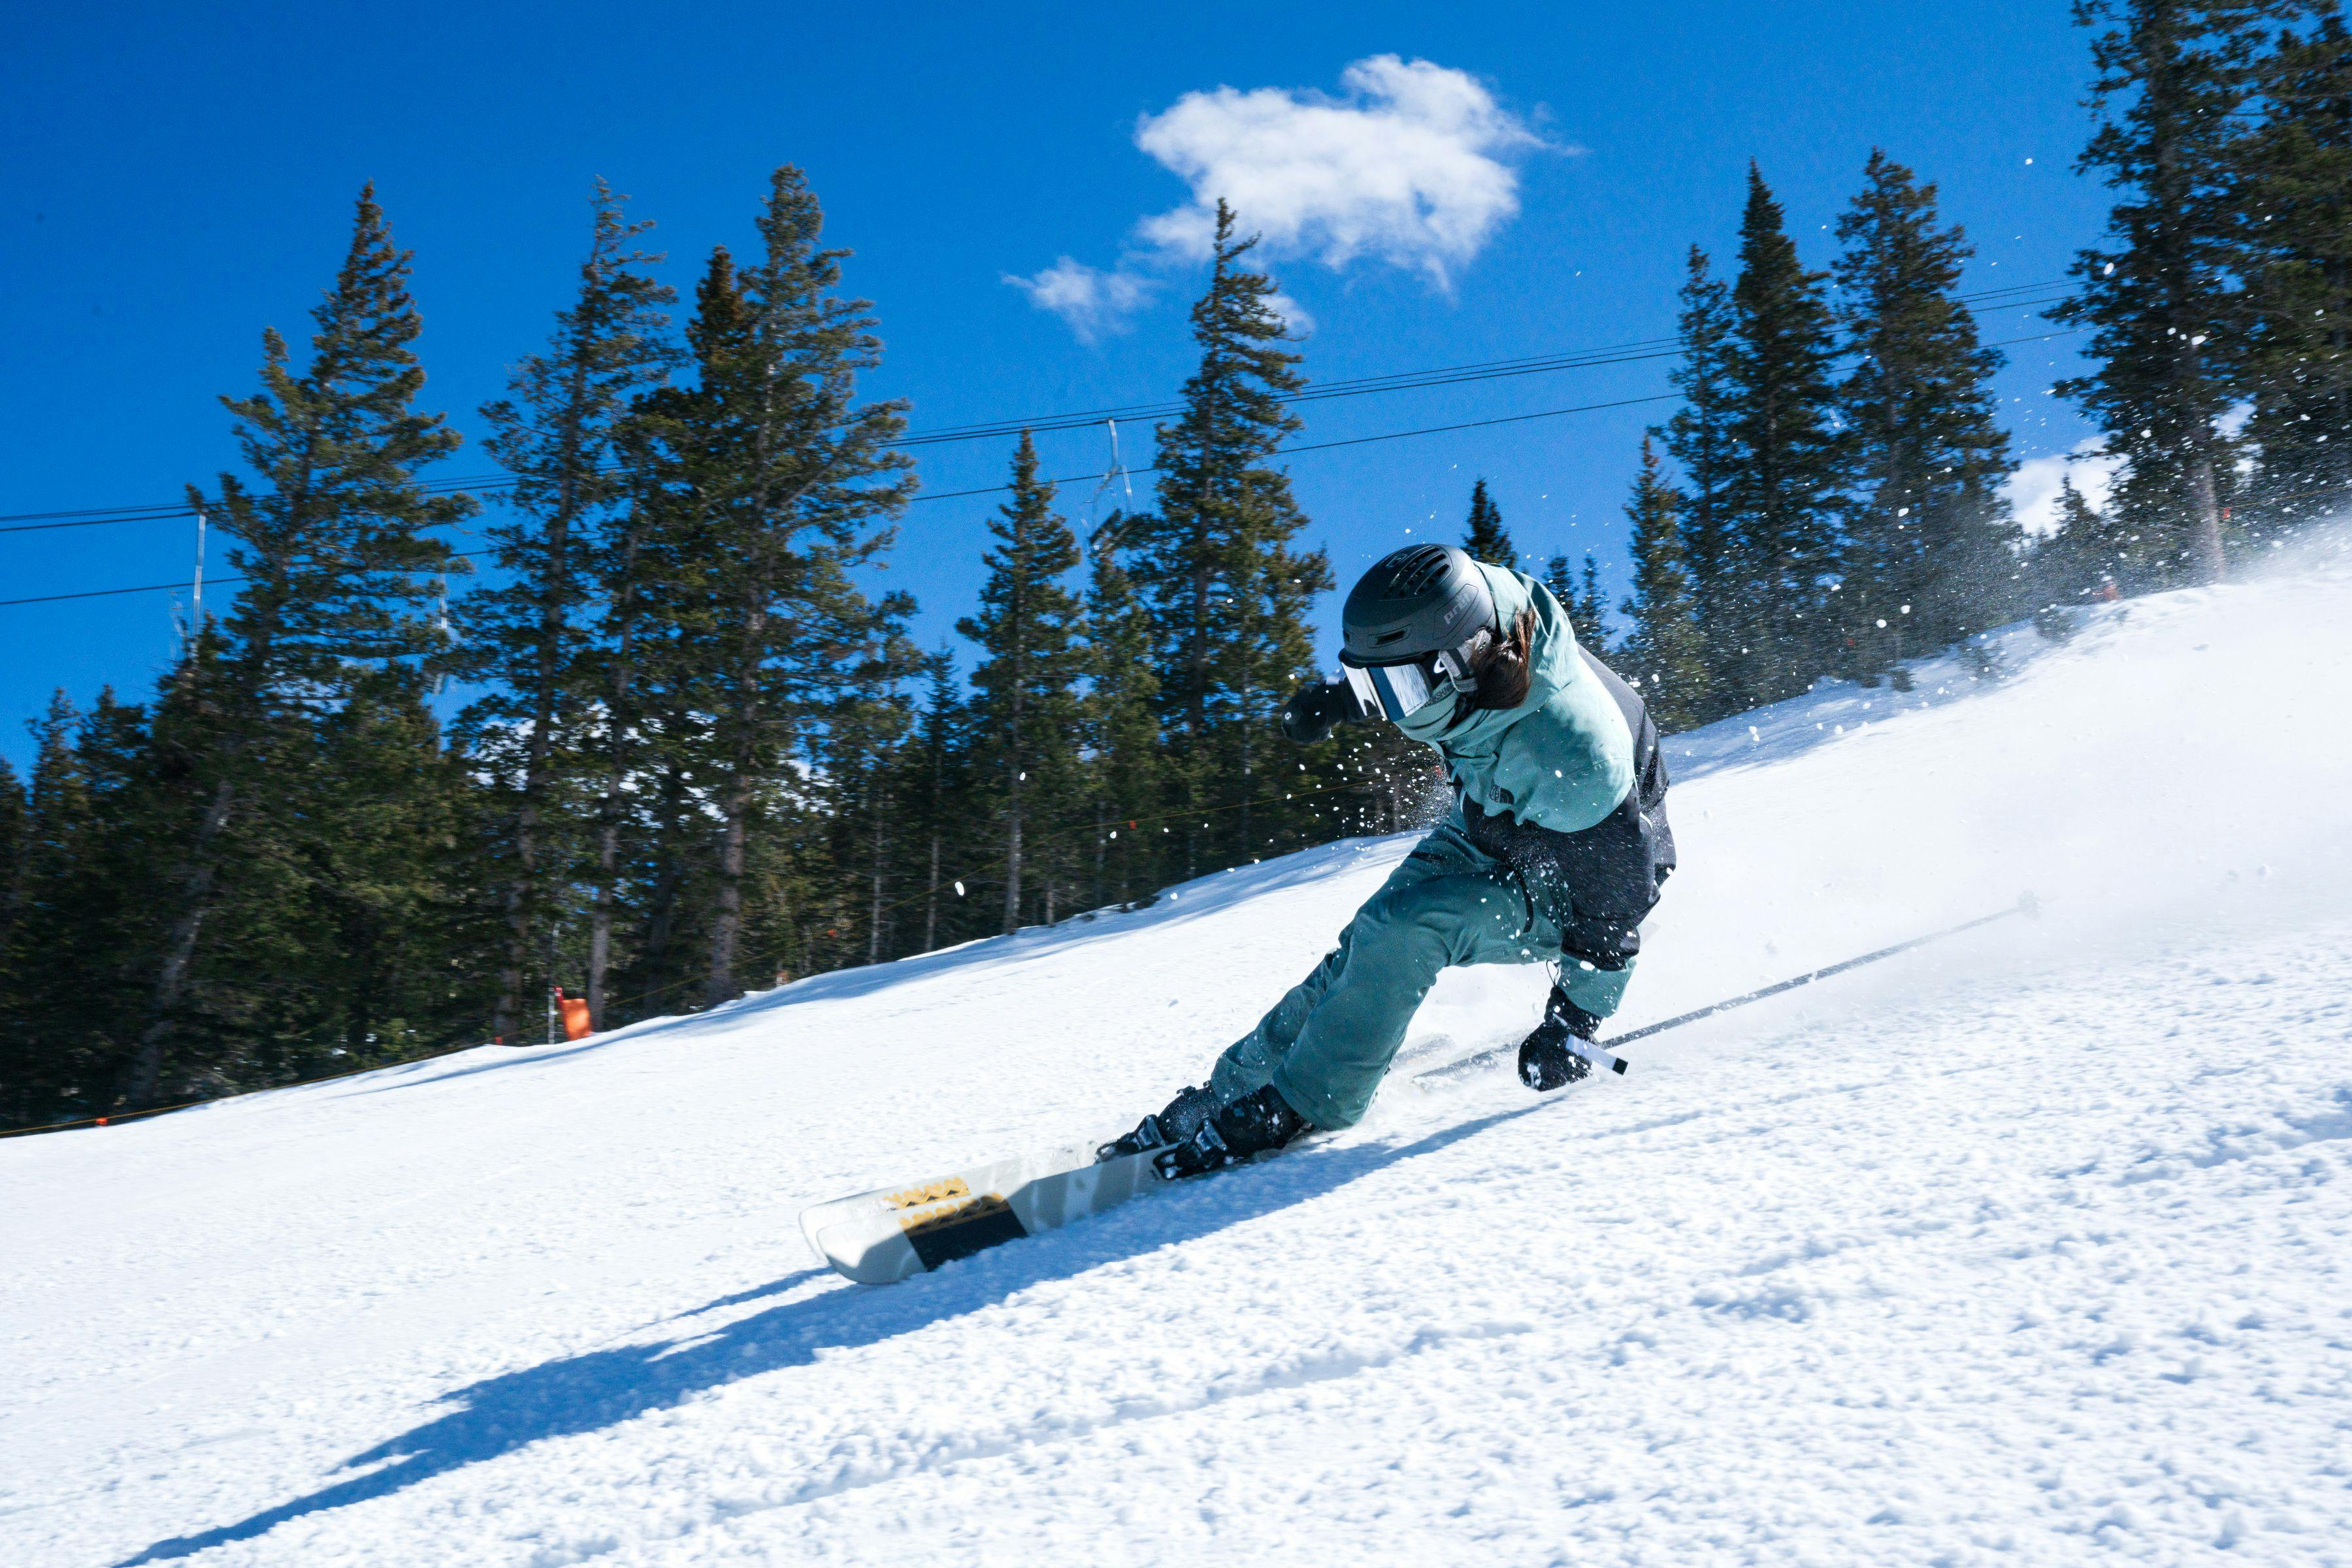 skier taking a tight low turn on a fast groomer at Taos Ski Valley